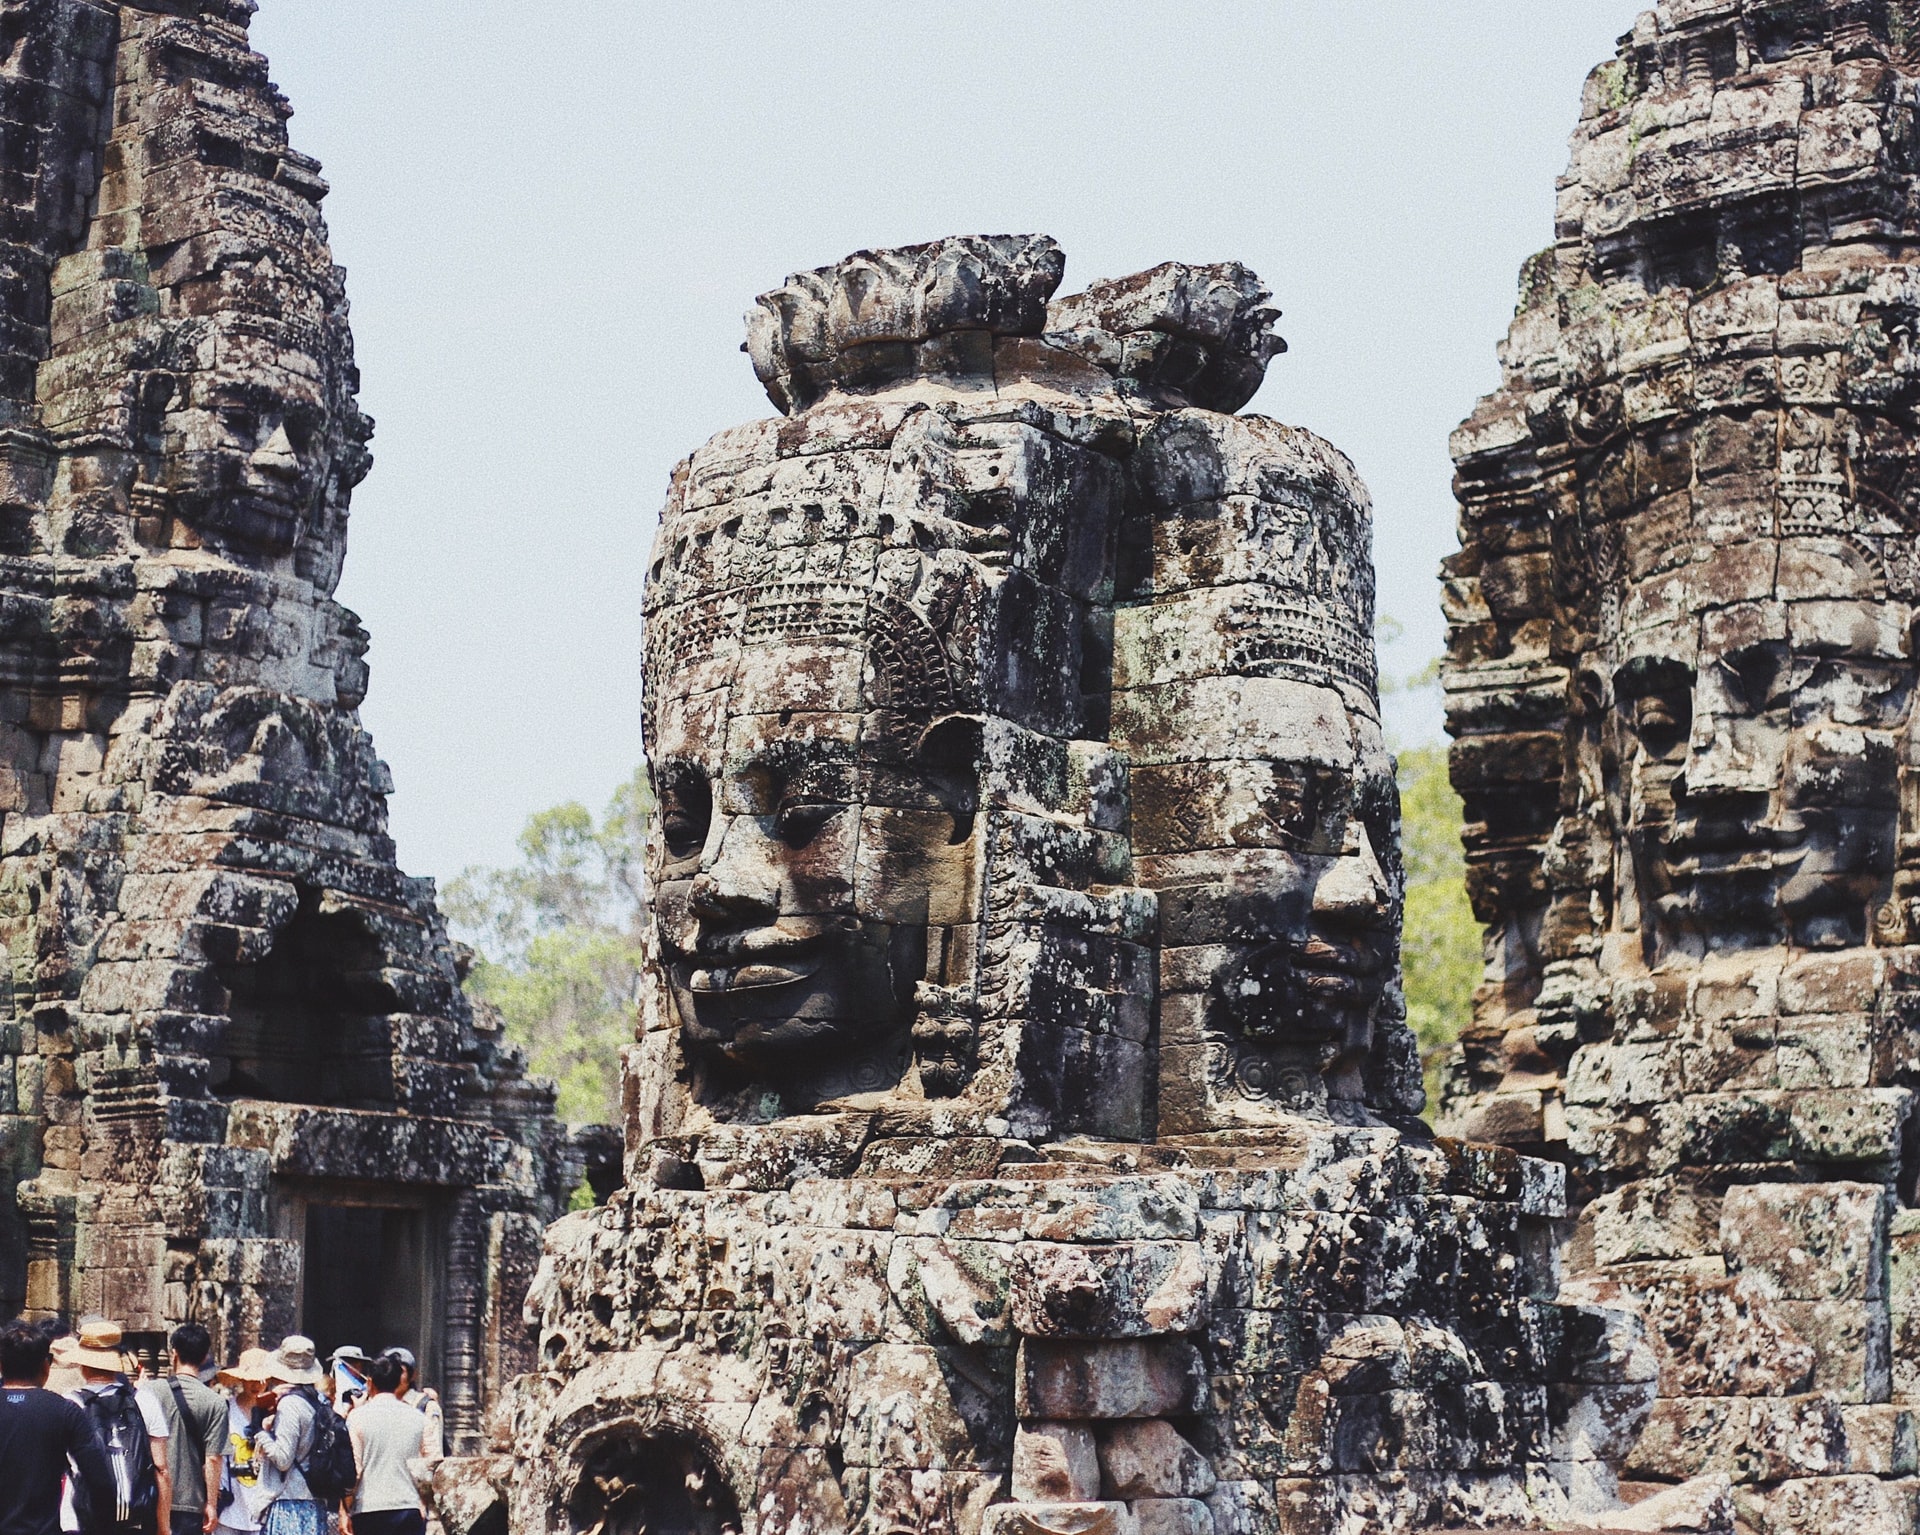 Faces carved into the temple of Angkor Wat